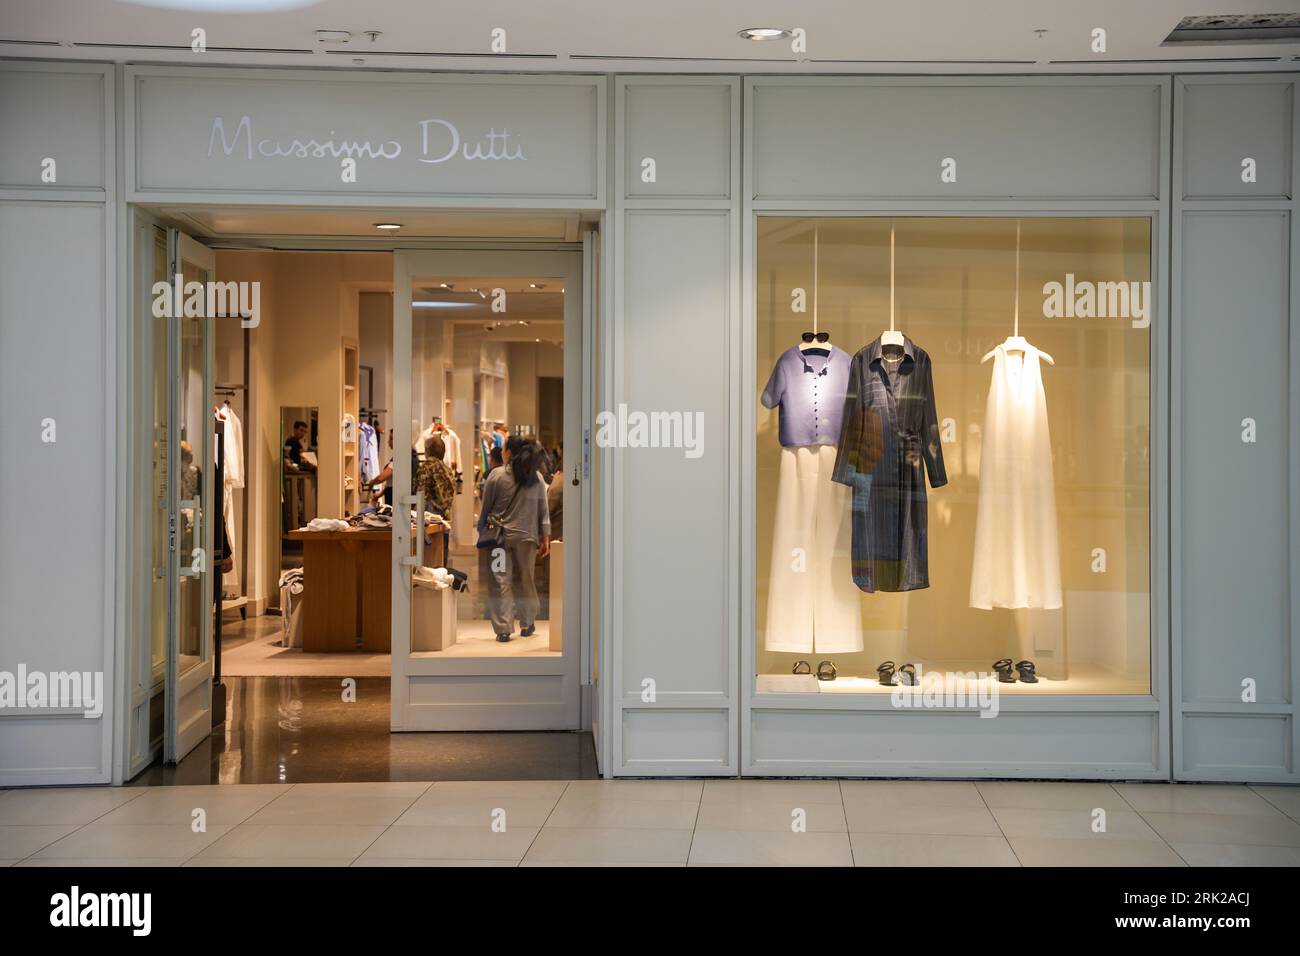 Almaty, Kazakhstan - August 17, 2023: Massimo Dutti retail store in a shopping mall. Clothing brand Stock Photo